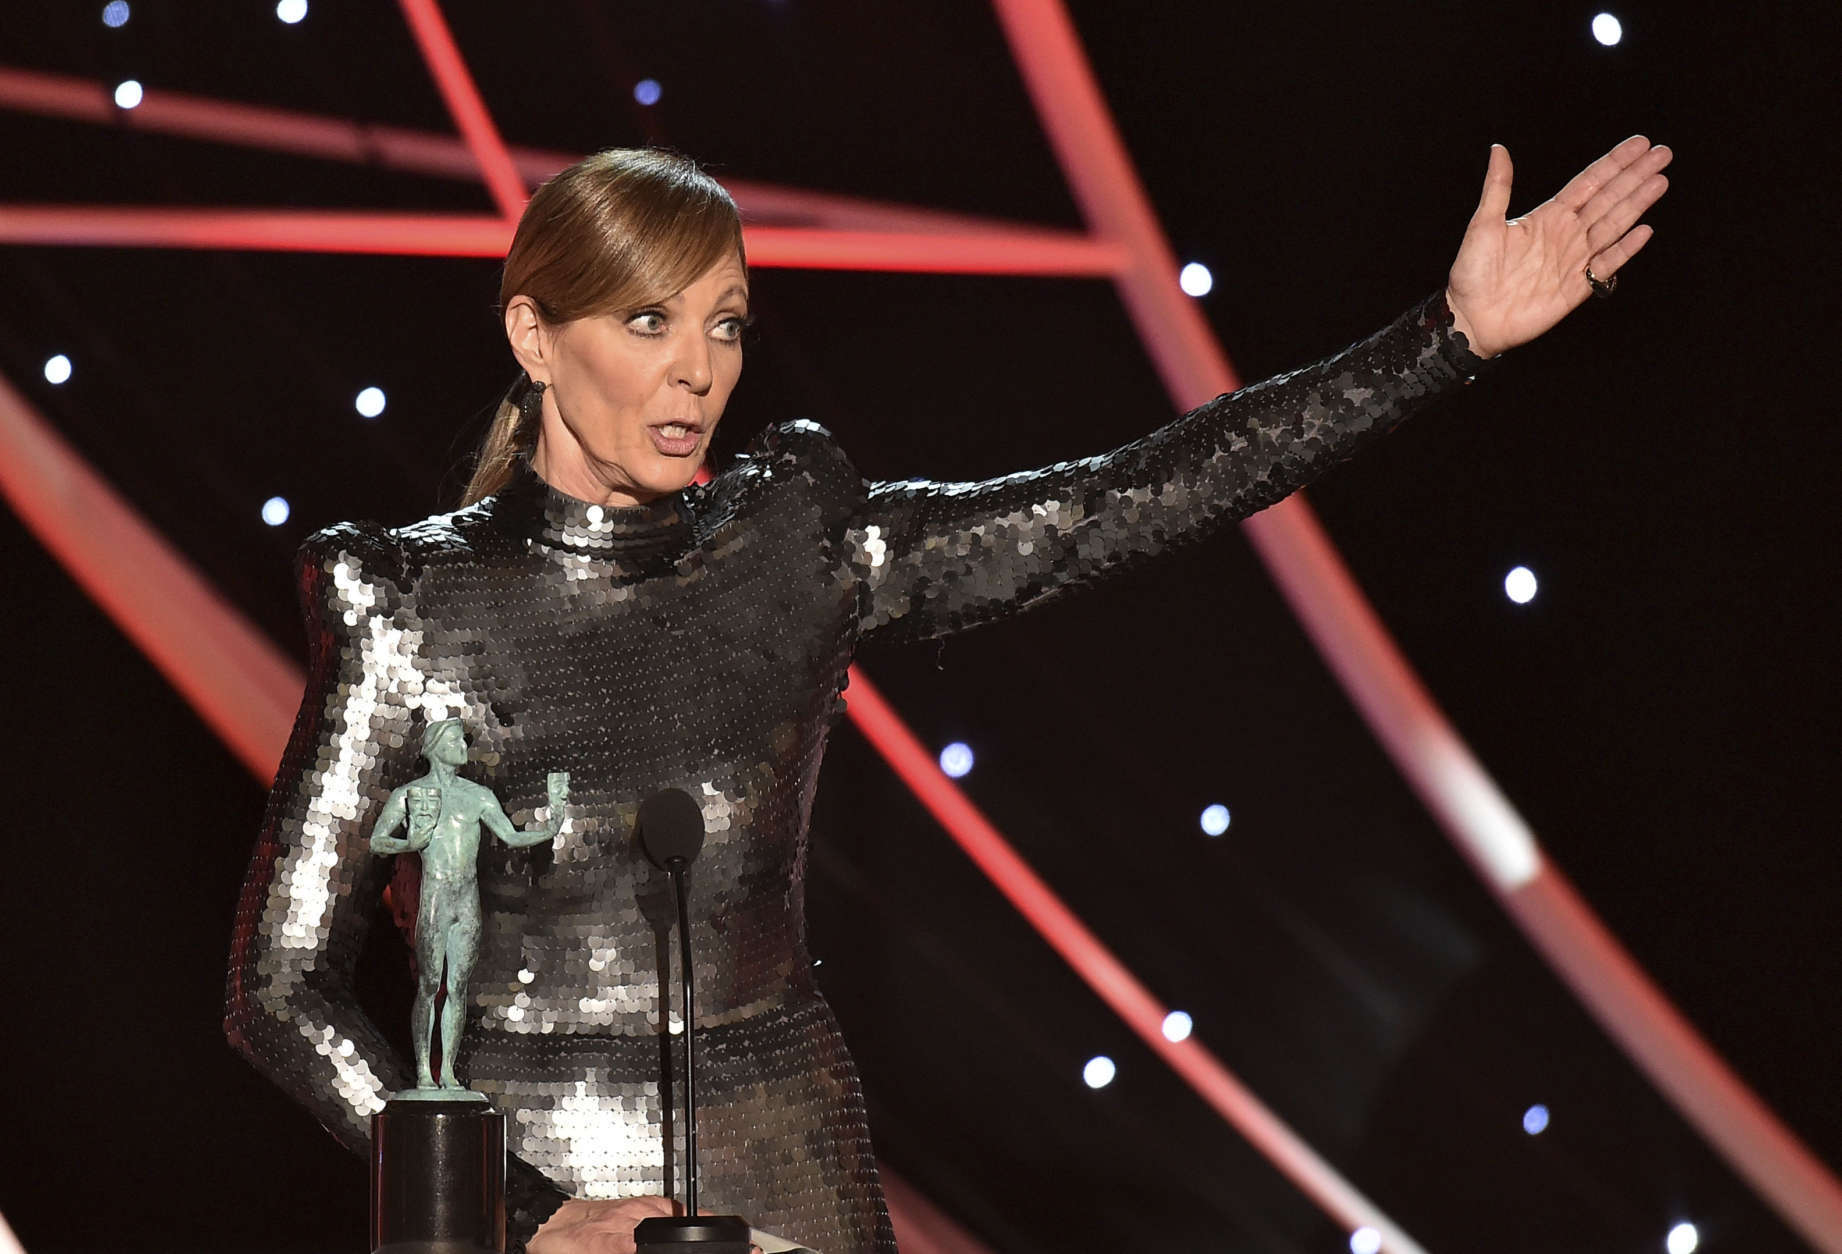 Allison Janney accepts the award for outstanding performance by a female actor in a supporting role for "I, Tonya" at the 24th annual Screen Actors Guild Awards at the Shrine Auditorium &amp; Expo Hall on Sunday, Jan. 21, 2018, in Los Angeles. (Photo by Vince Bucci/Invision/AP)